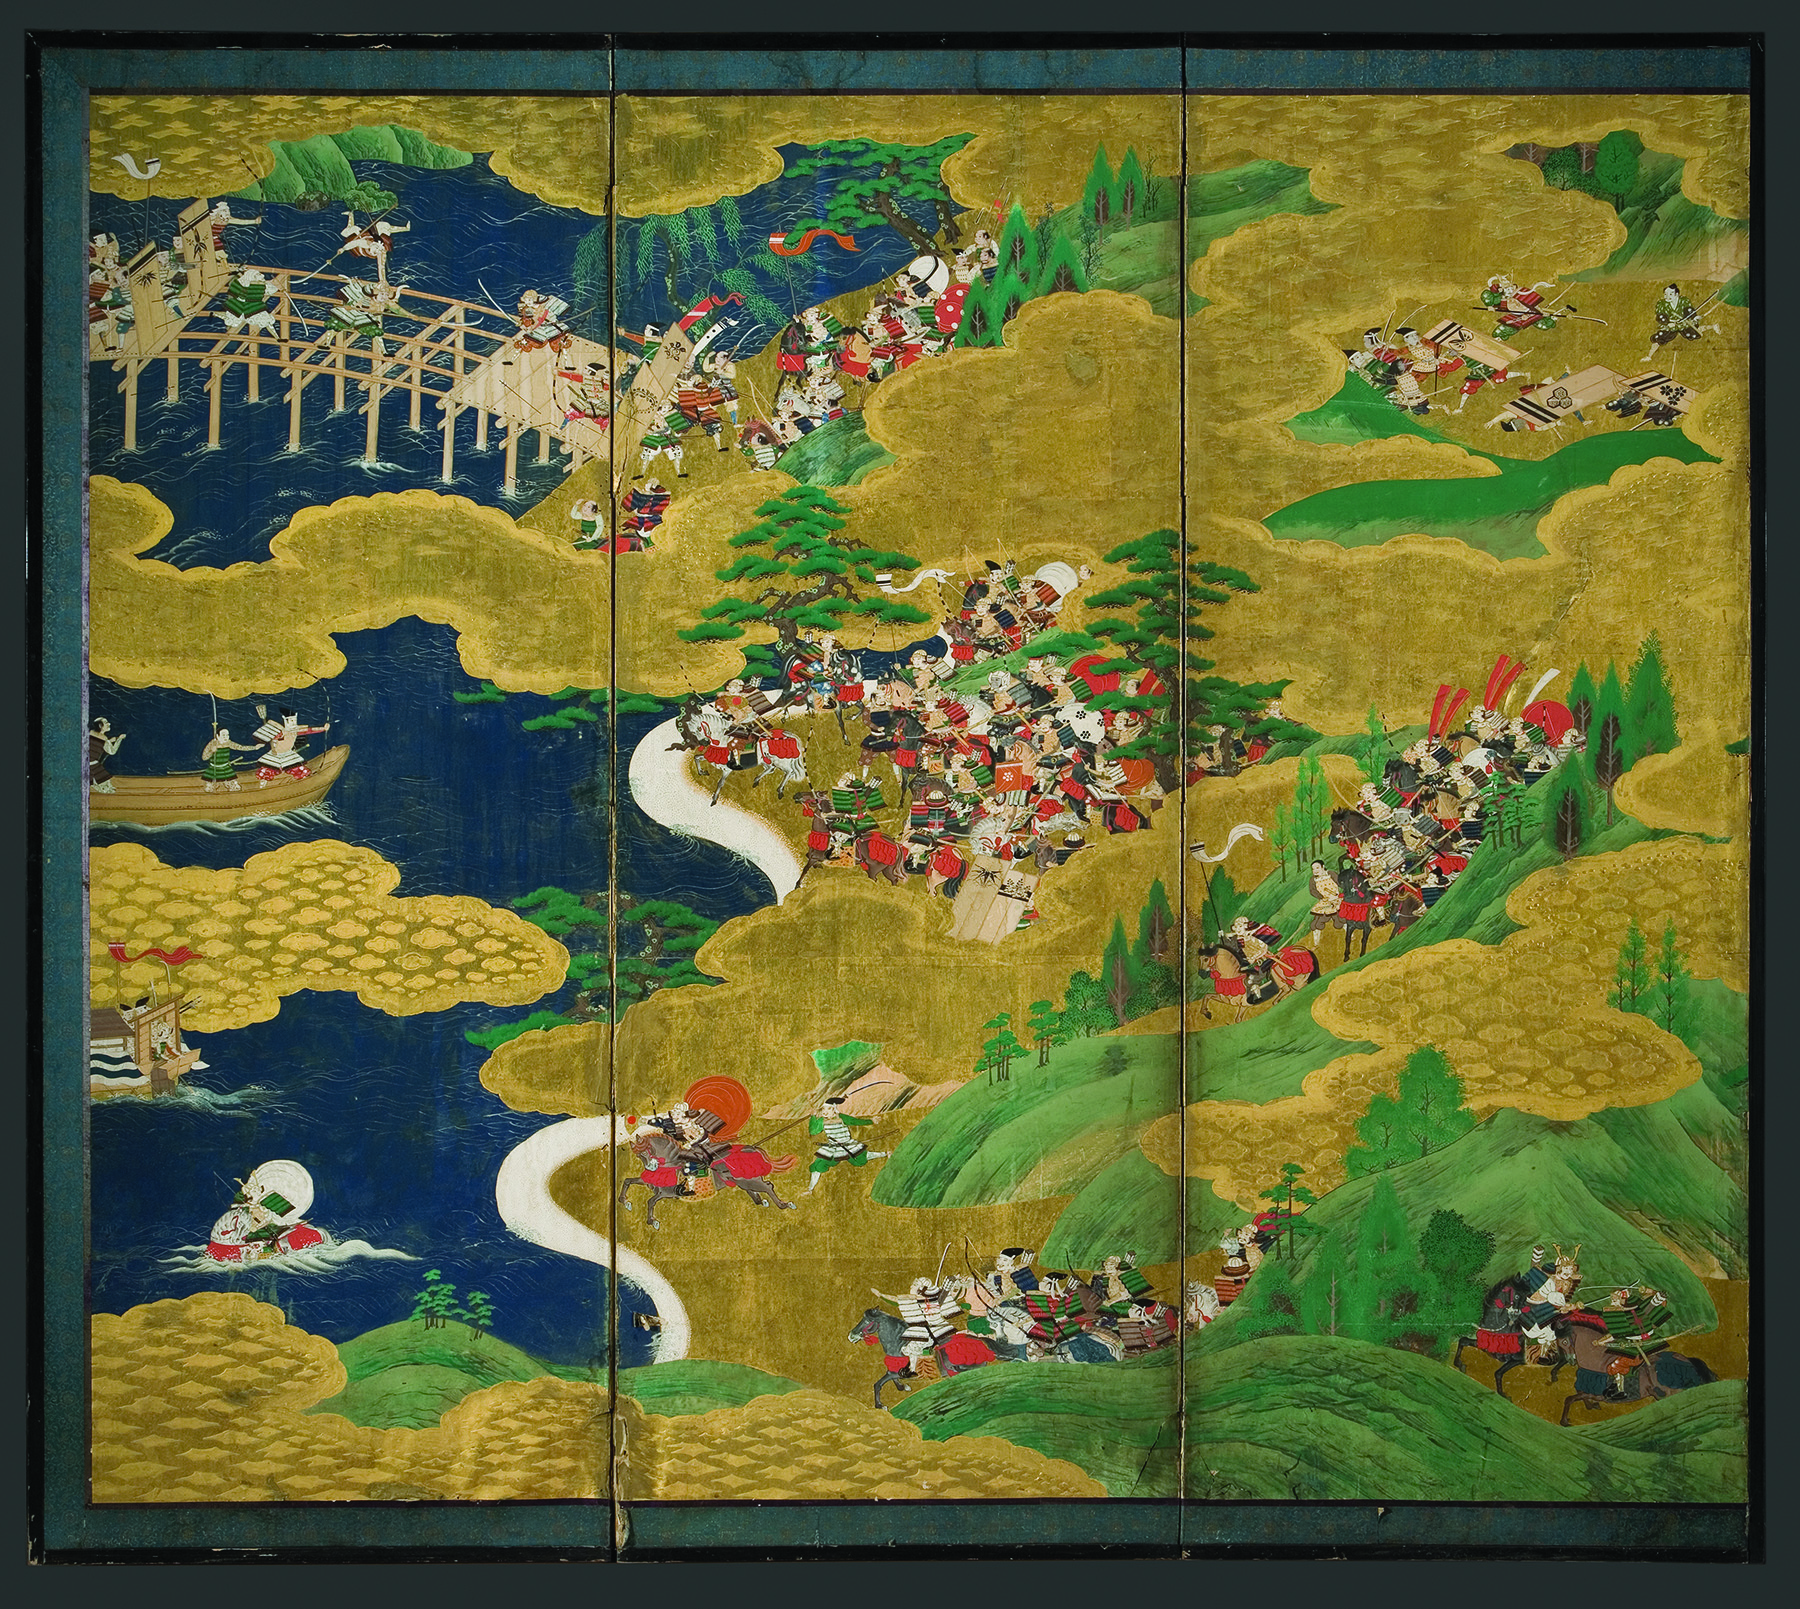 A traditional Byobu screen from the 18th-century Japanese Tosa School of design was constructed out of painted fabric, colored inks and gold leaves.